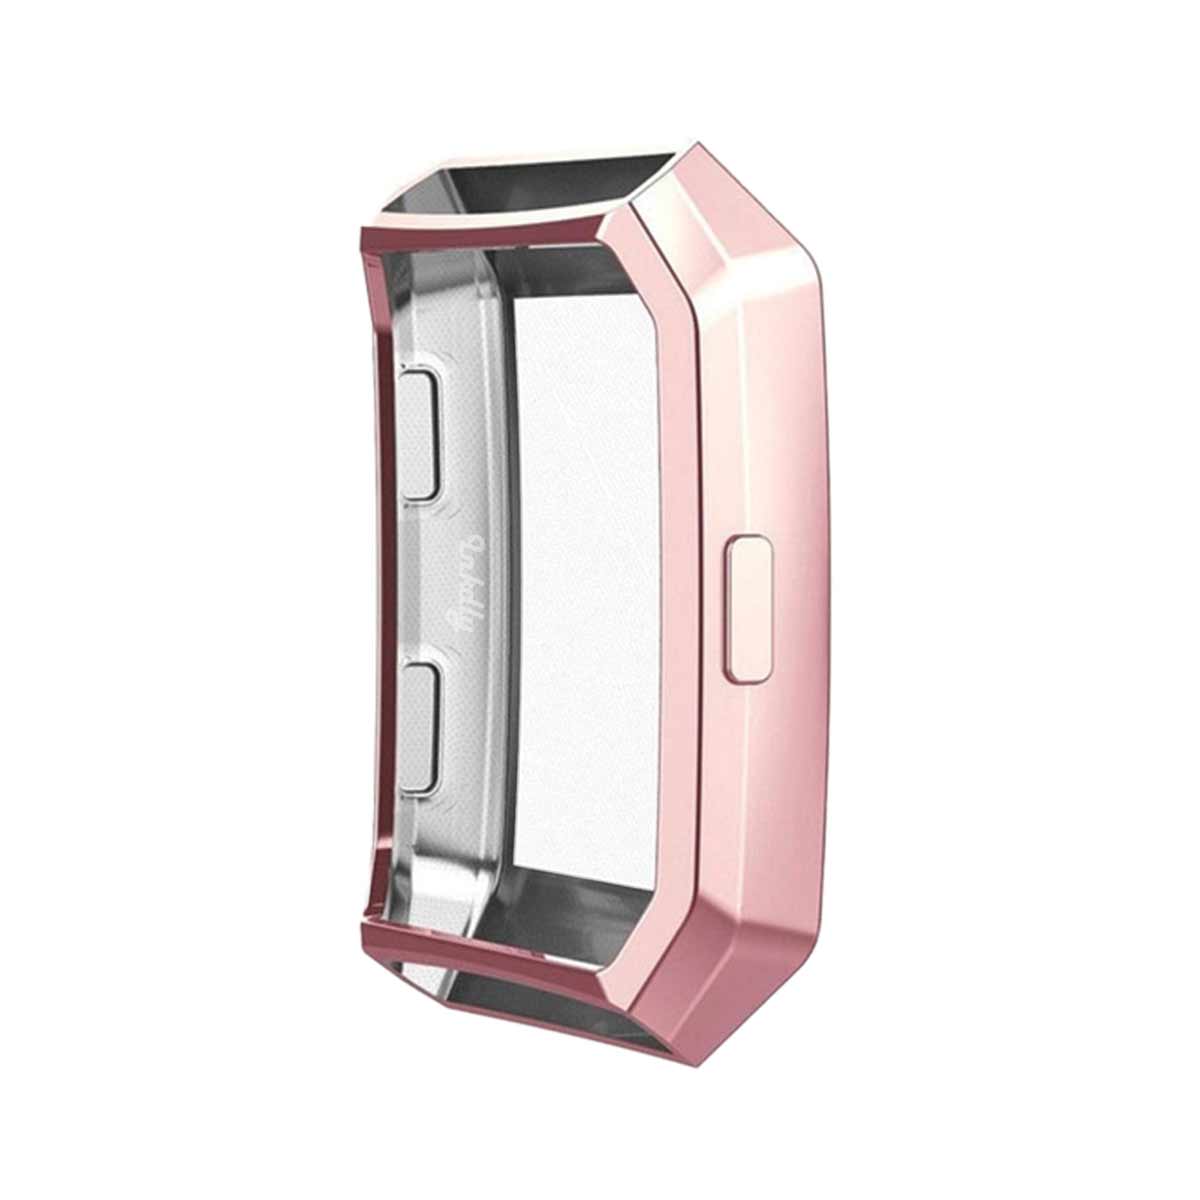 Slimfit Fitbit Ionic Protective Case & Screen Protector Pink  